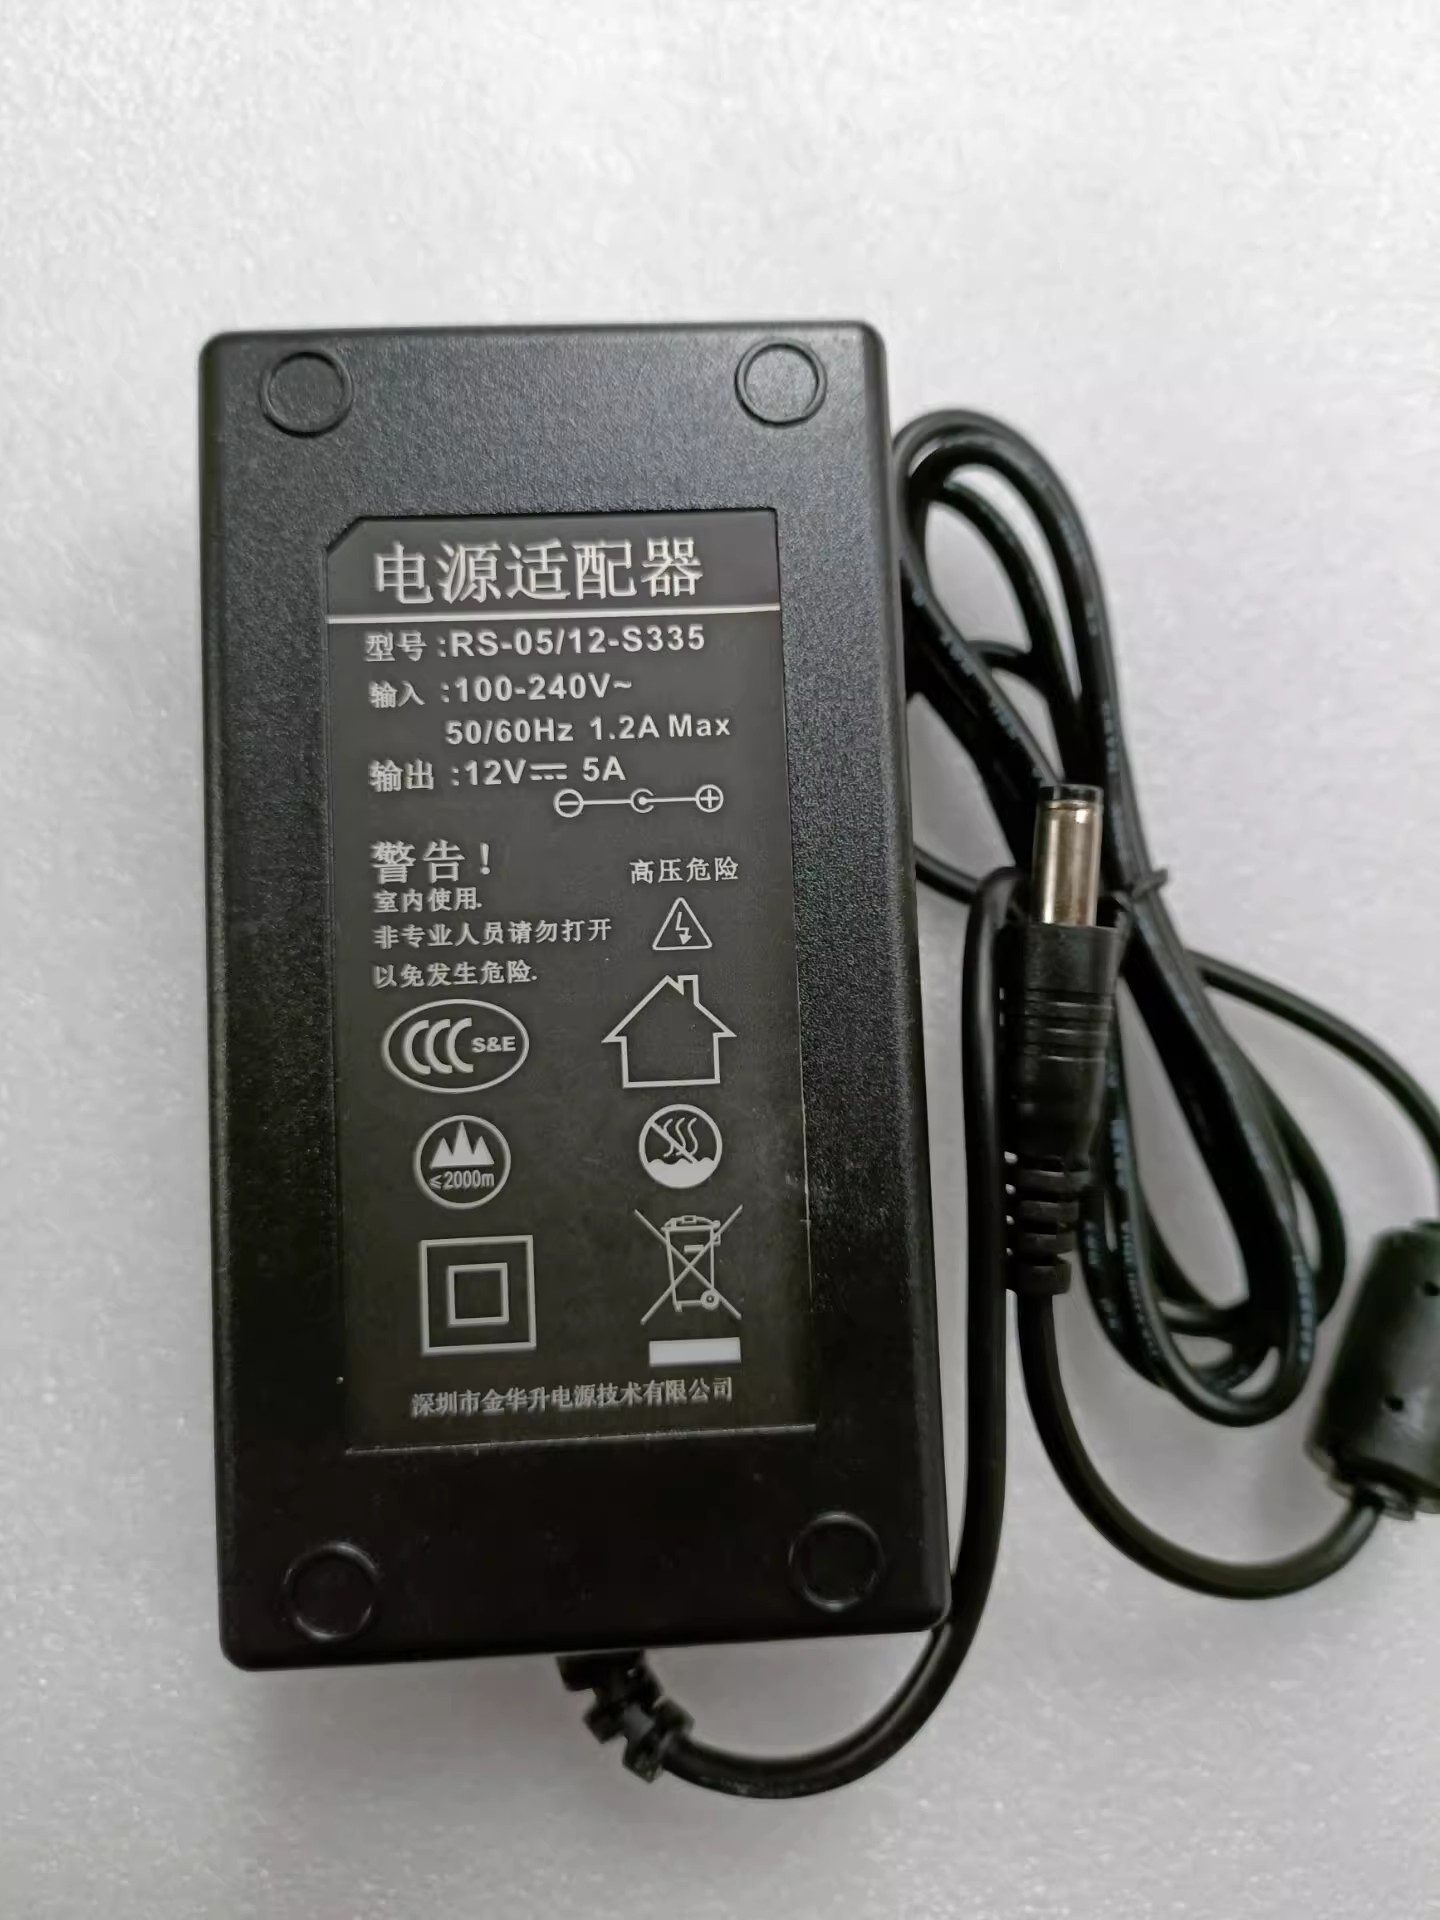 *Brand NEW*12V 5A AC DC ADAPTHE RS-05/12-S335 POWER Supply